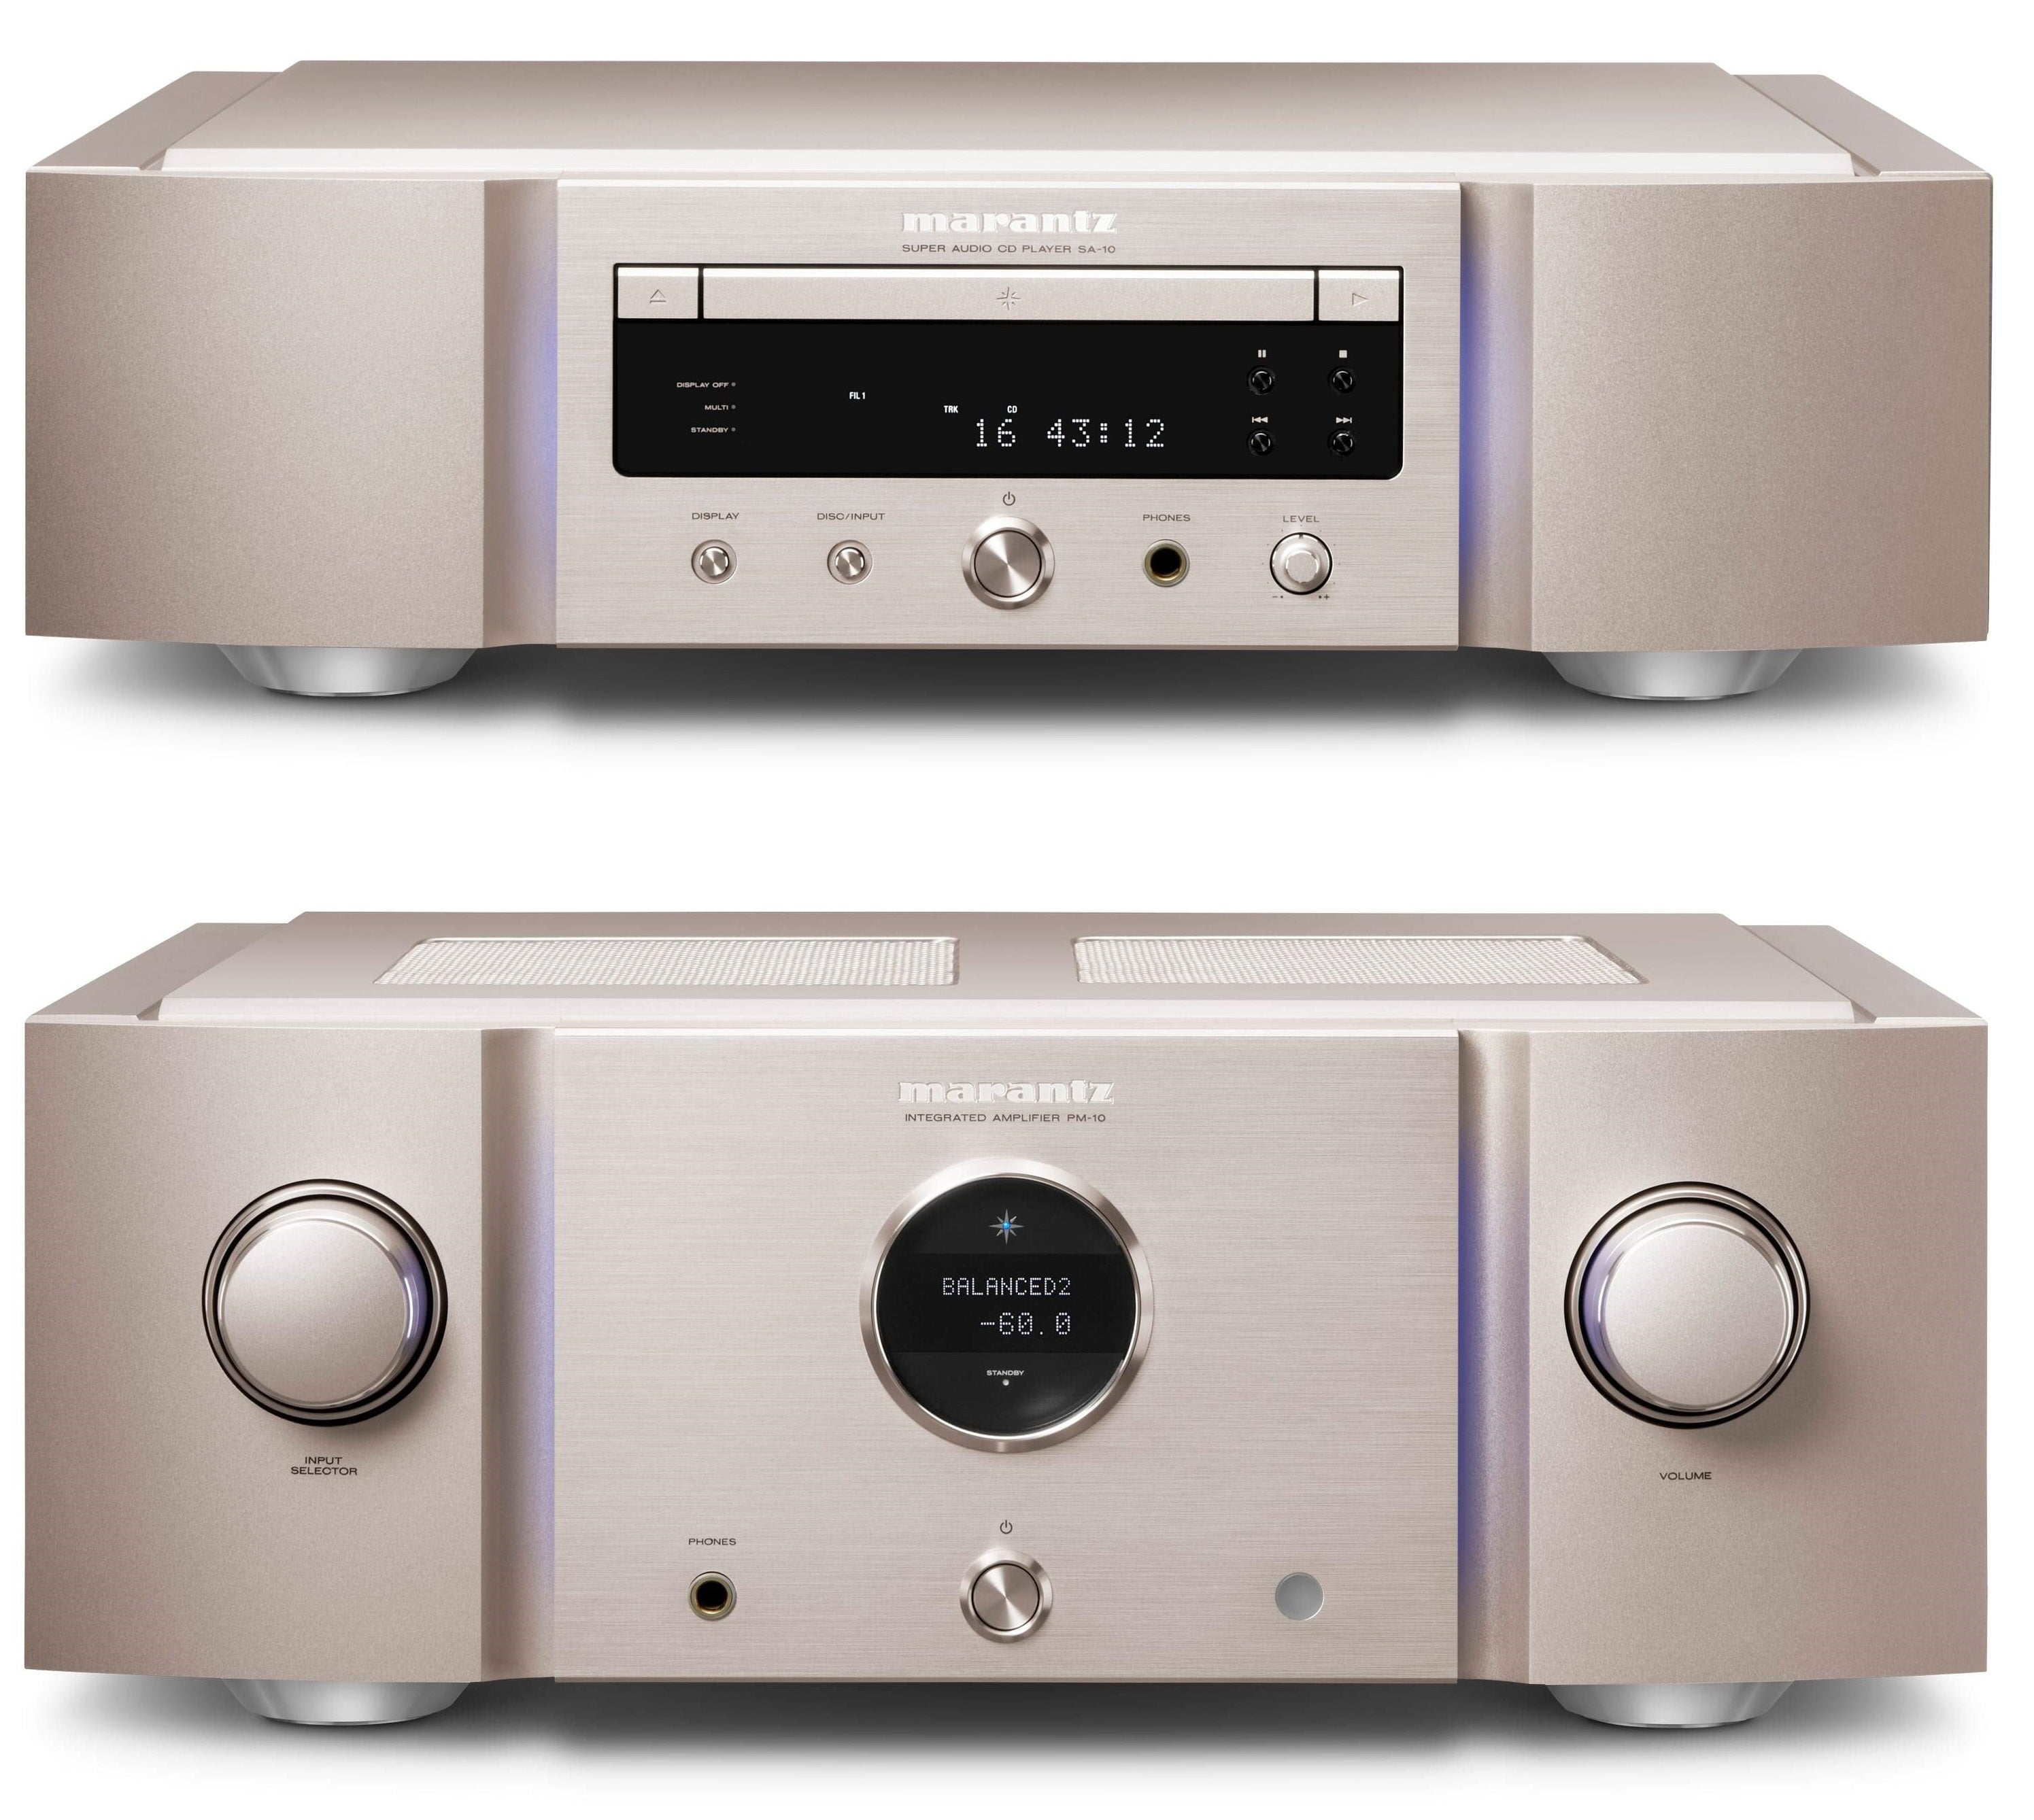 Marantz PM6007 Integrated Amplifier First Look - My Site